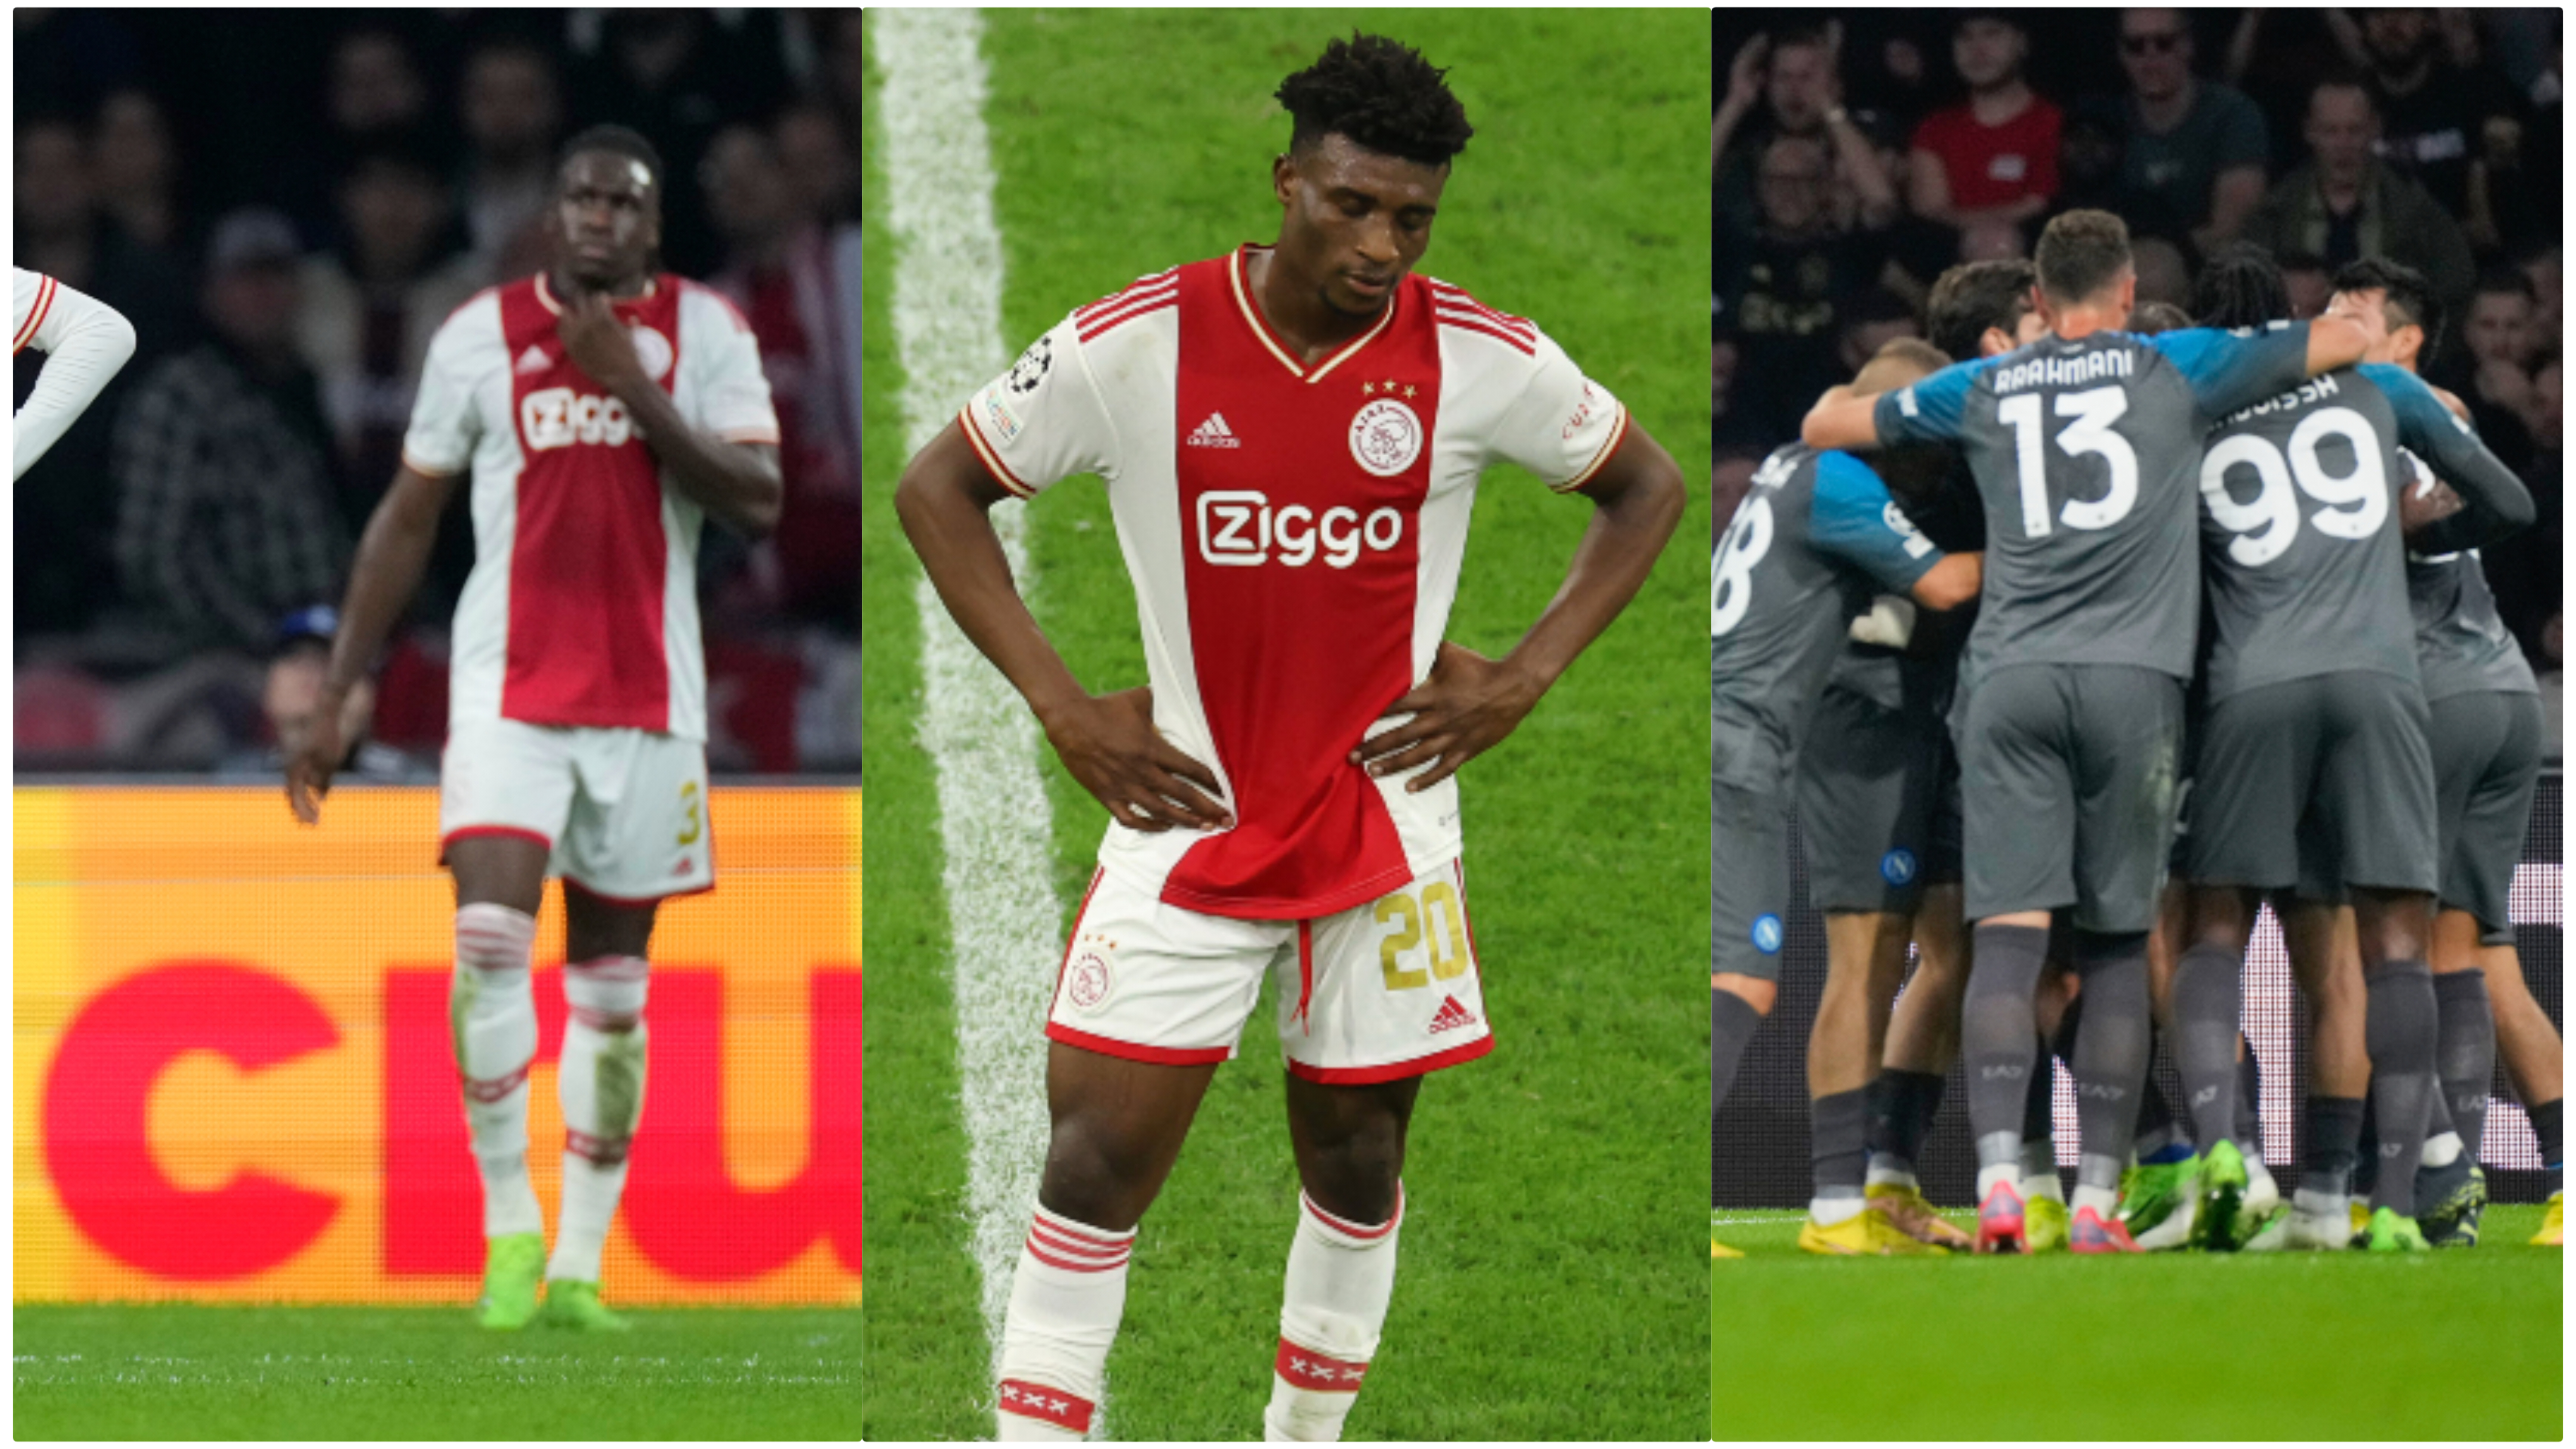 Napoli destroy Calvin Bassey and 10-man Ajax to continue superb form